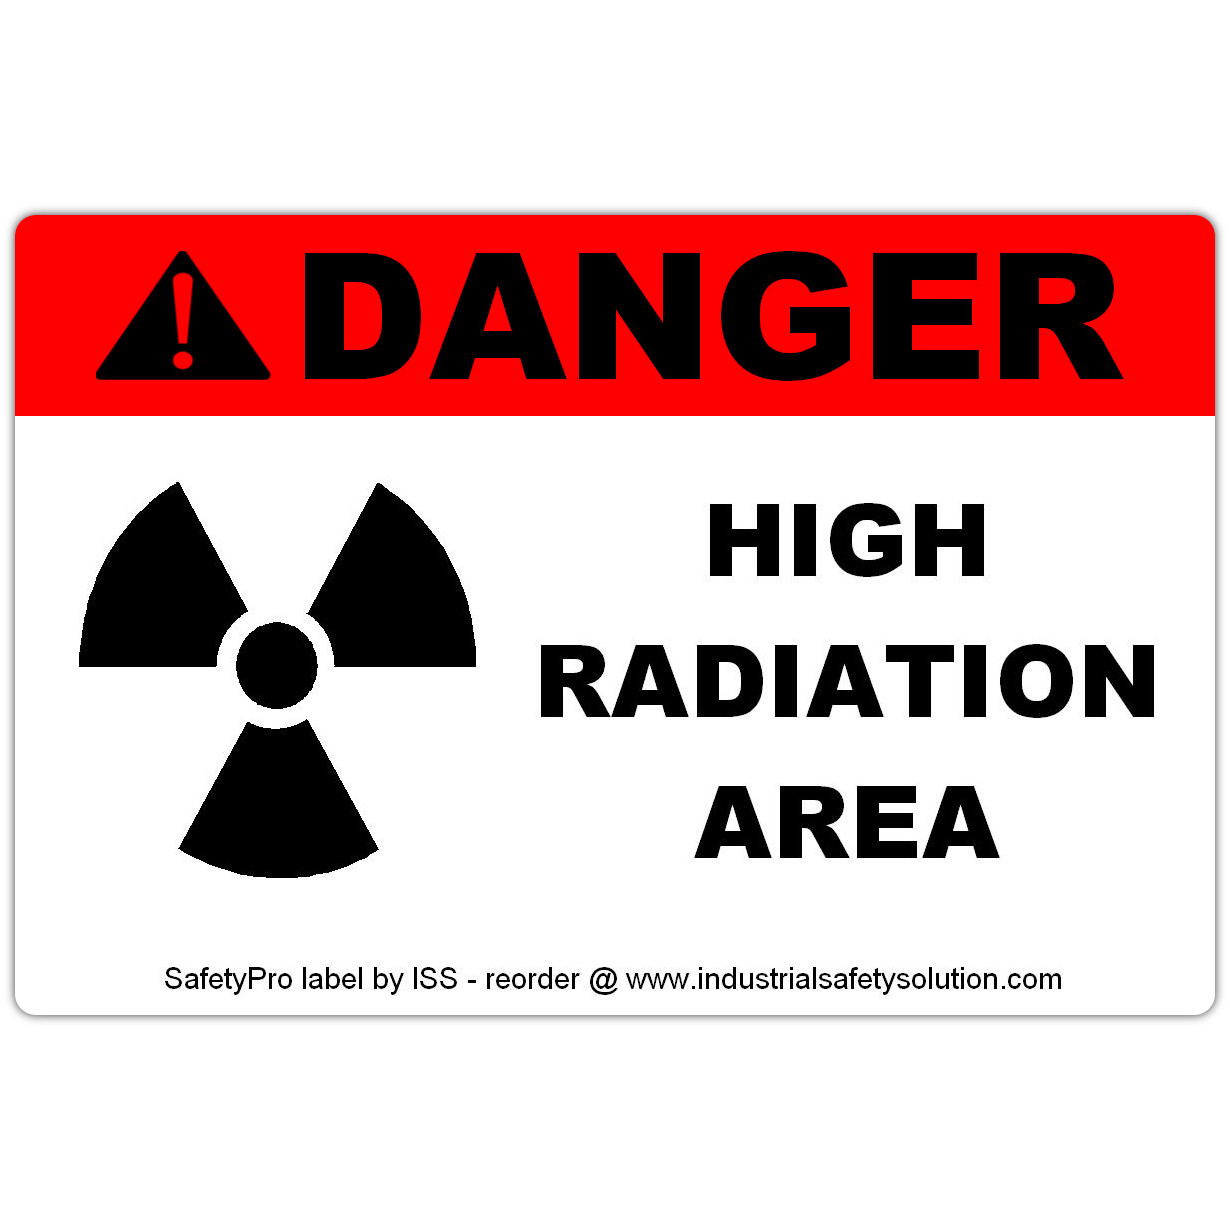 Detail view for 4" x 6" DANGER High Radiation Safety Label